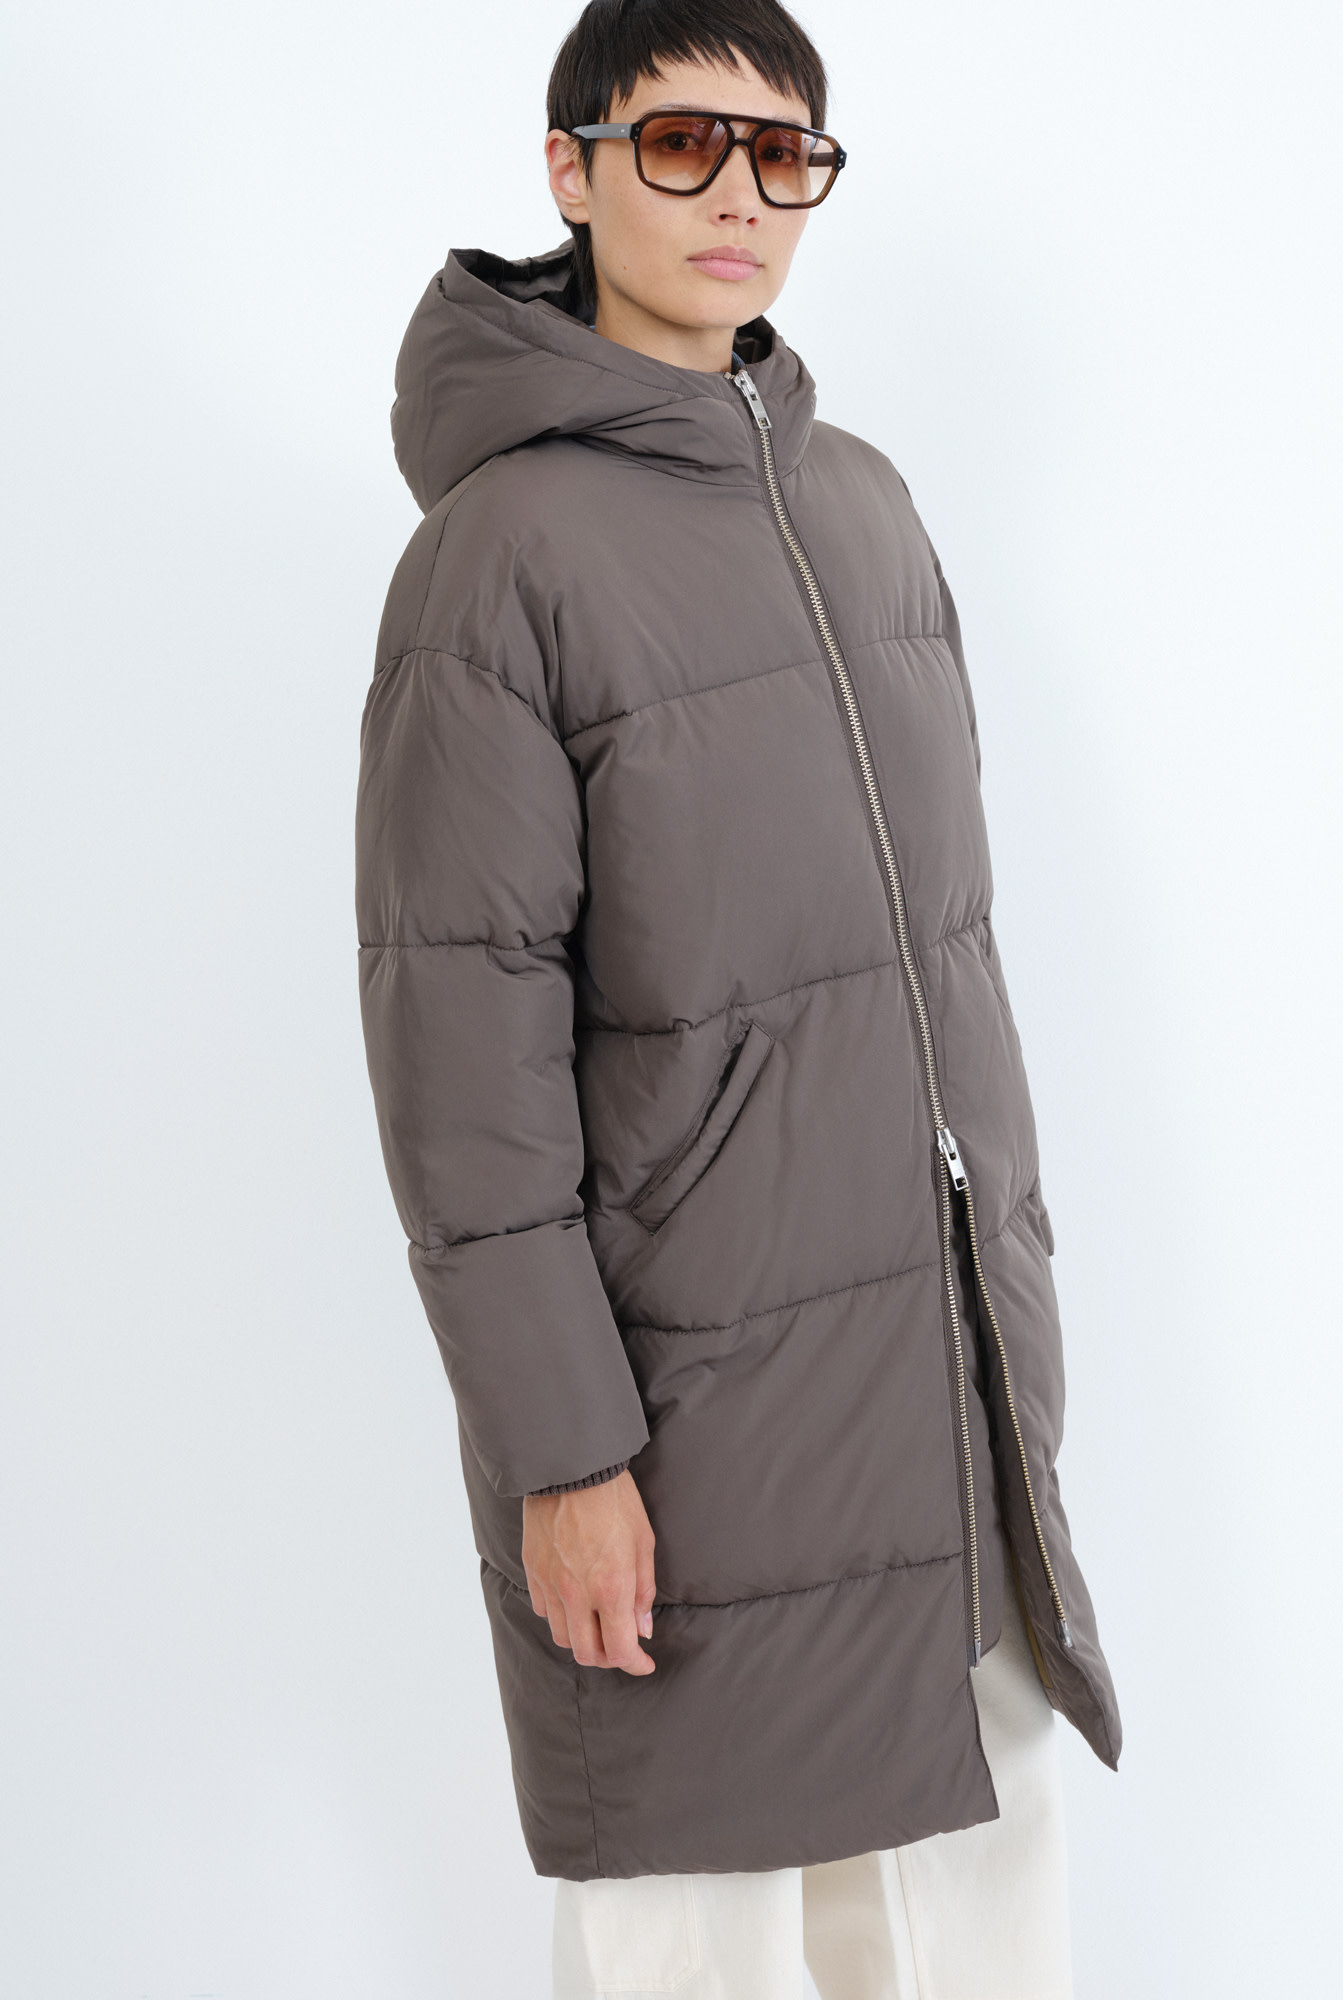 Embassy of Bricks and Logs Embassy of Bricks and Logs, Elphin Puffer Coat, black olive, S